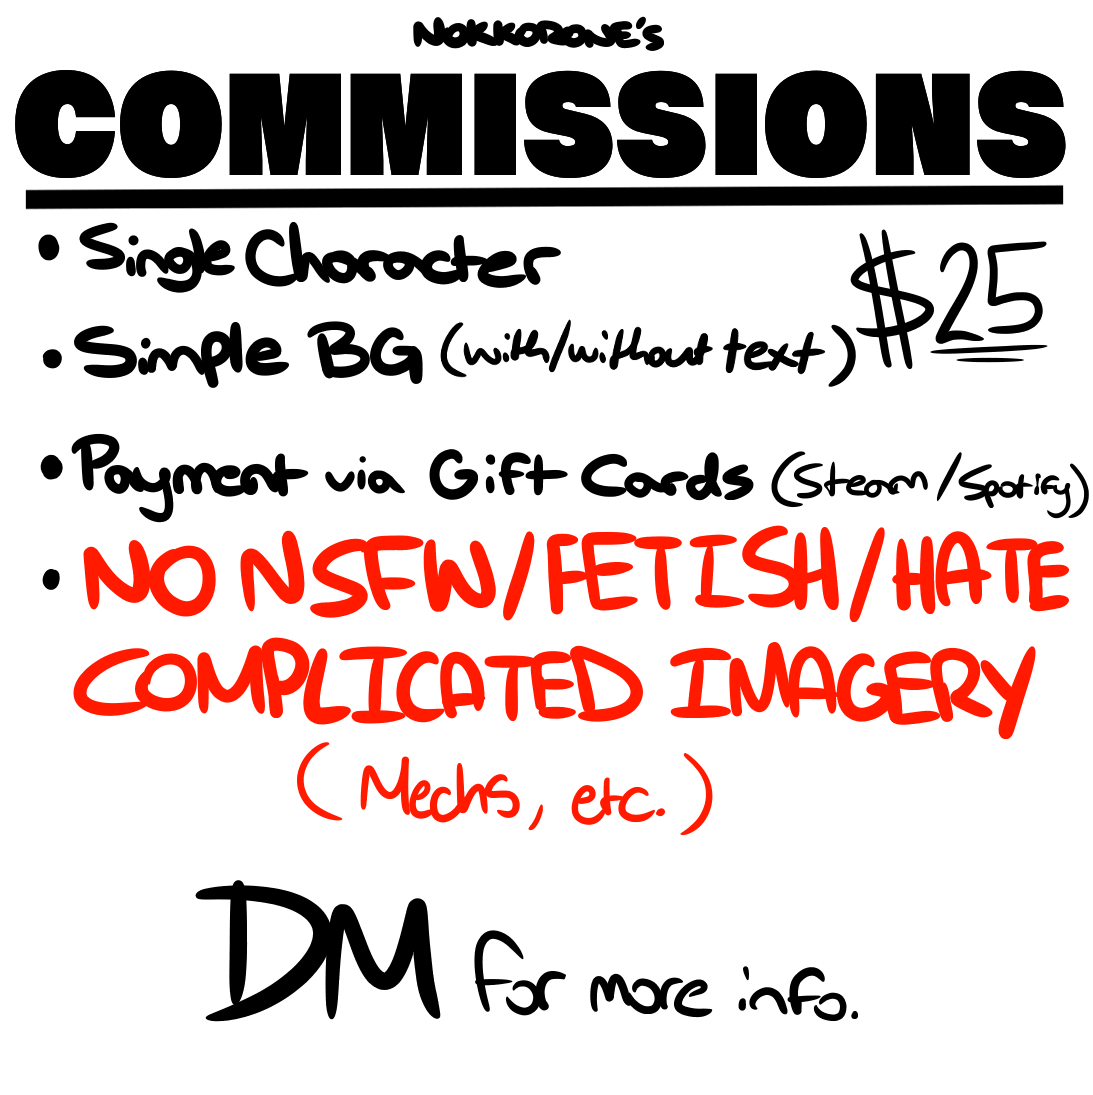 As of 8/6/20 (4:30 PM EST), I will be opening commissions.
Additional Notes:
Payment is UPFRONT.
I have the right to refuse ANY commission.
Also accepting Hulu Gift Cards.
Be as CONCISE as possible upon request.

Ways to pay:
https://t.co/Vvnno51Cfu
https://t.co/gOOkOCnX5a 